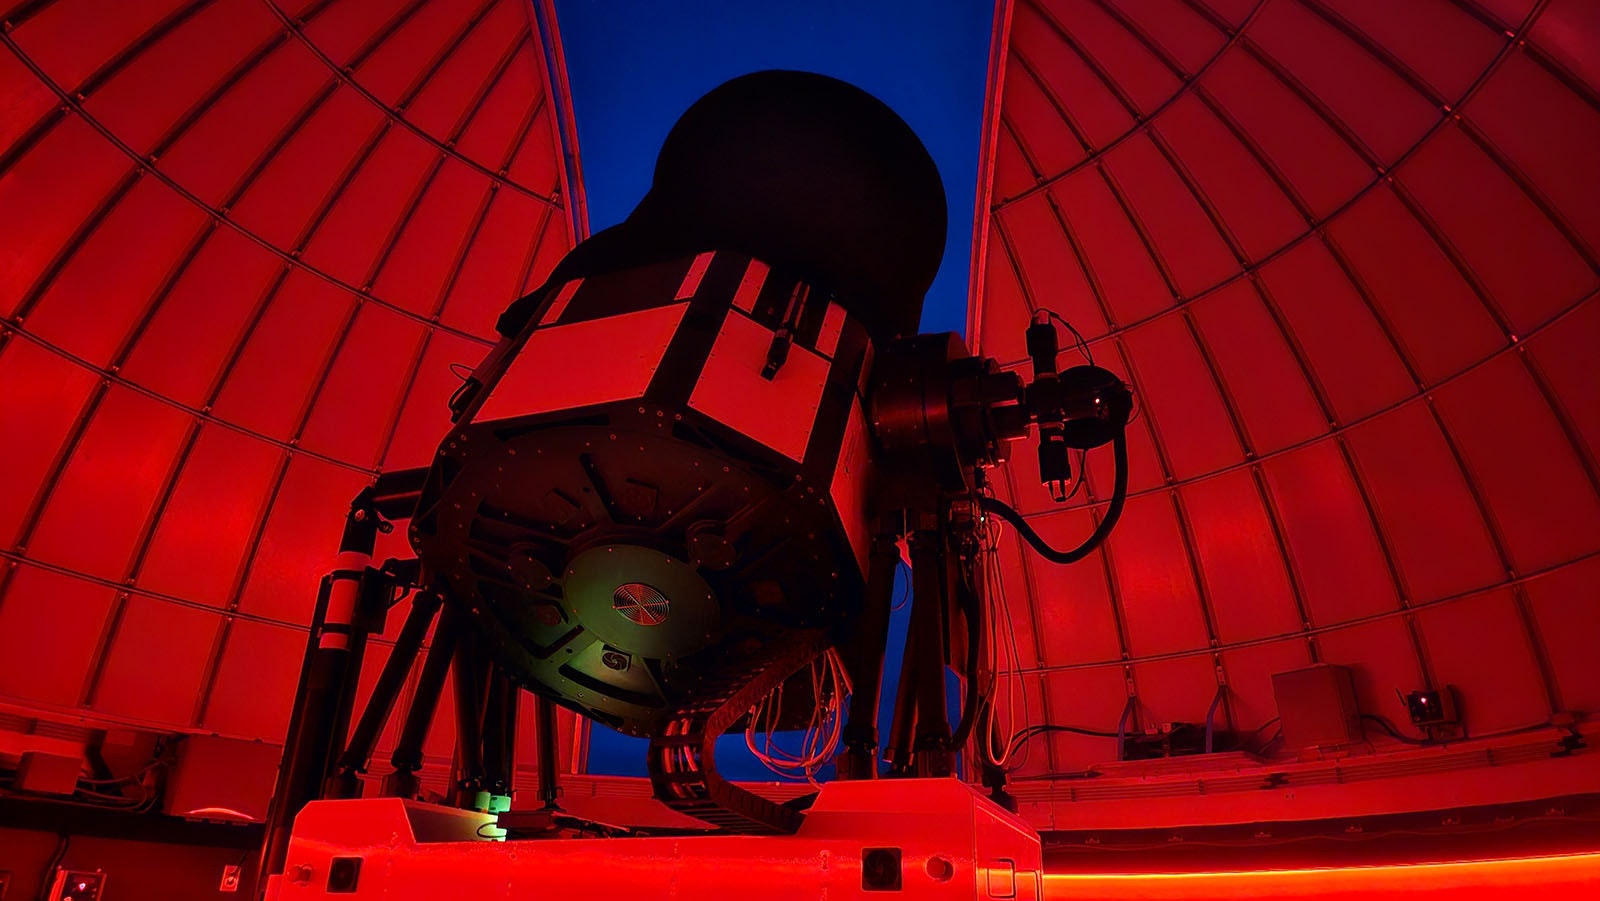 The massive 1-meter telescope seems immovable. Until, like an alien robot, it suddenly moves.